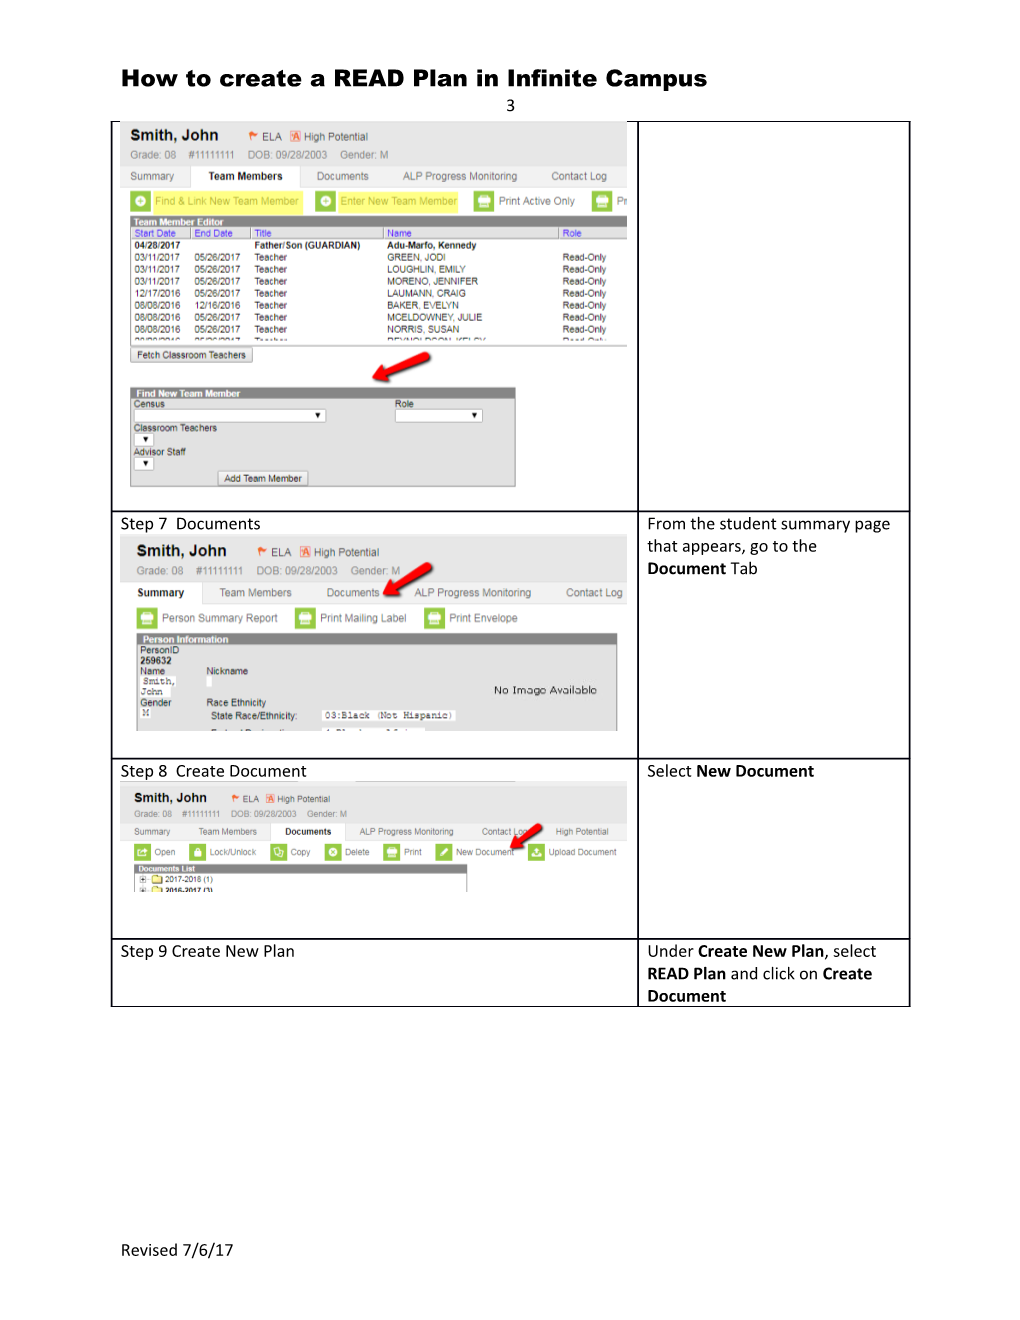 How to Create a READ Plan in Infinite Campus 1